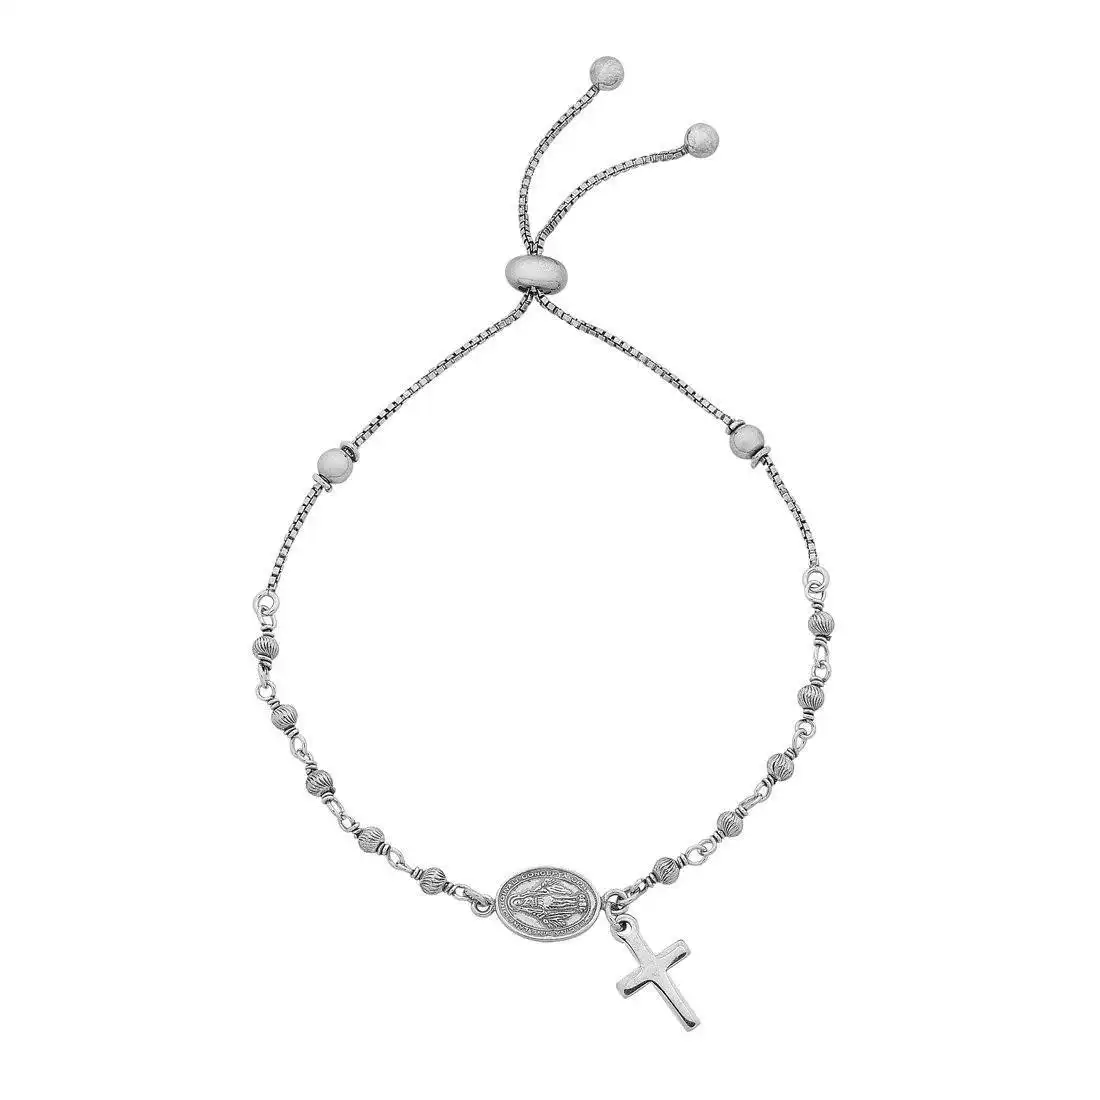 Sterling Silver Our Lady Mary Rosary Beads Bolo Bracelet